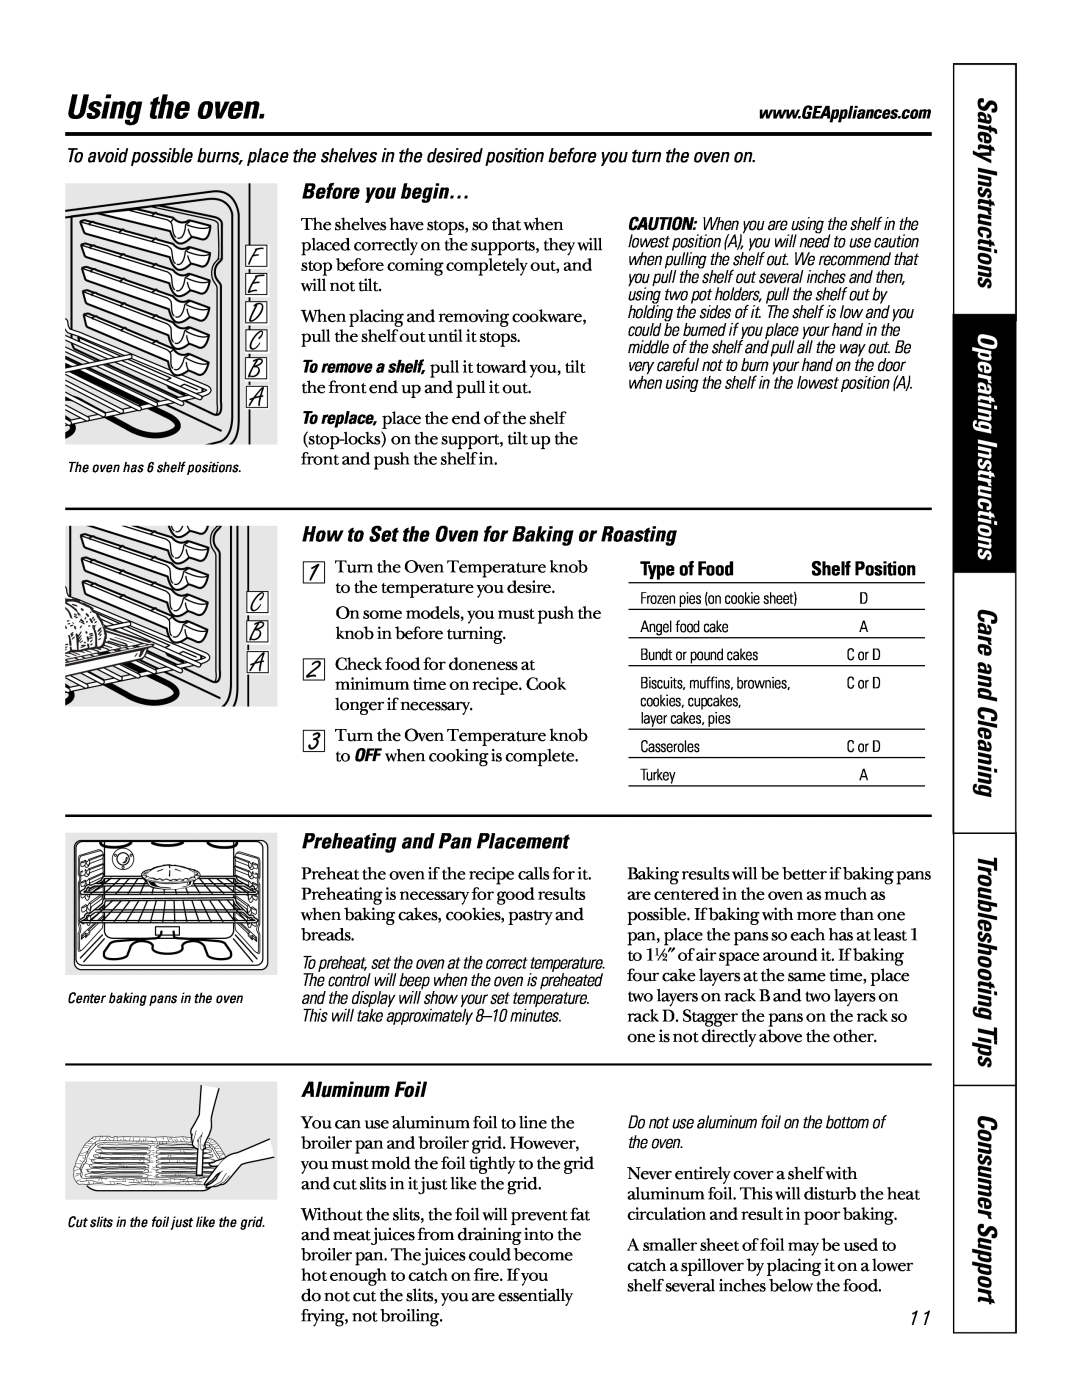 GE EER2000 Using the oven, Consumer Support, Care and Cleaning, Troubleshooting Tips, Before you begin…, Aluminum Foil 